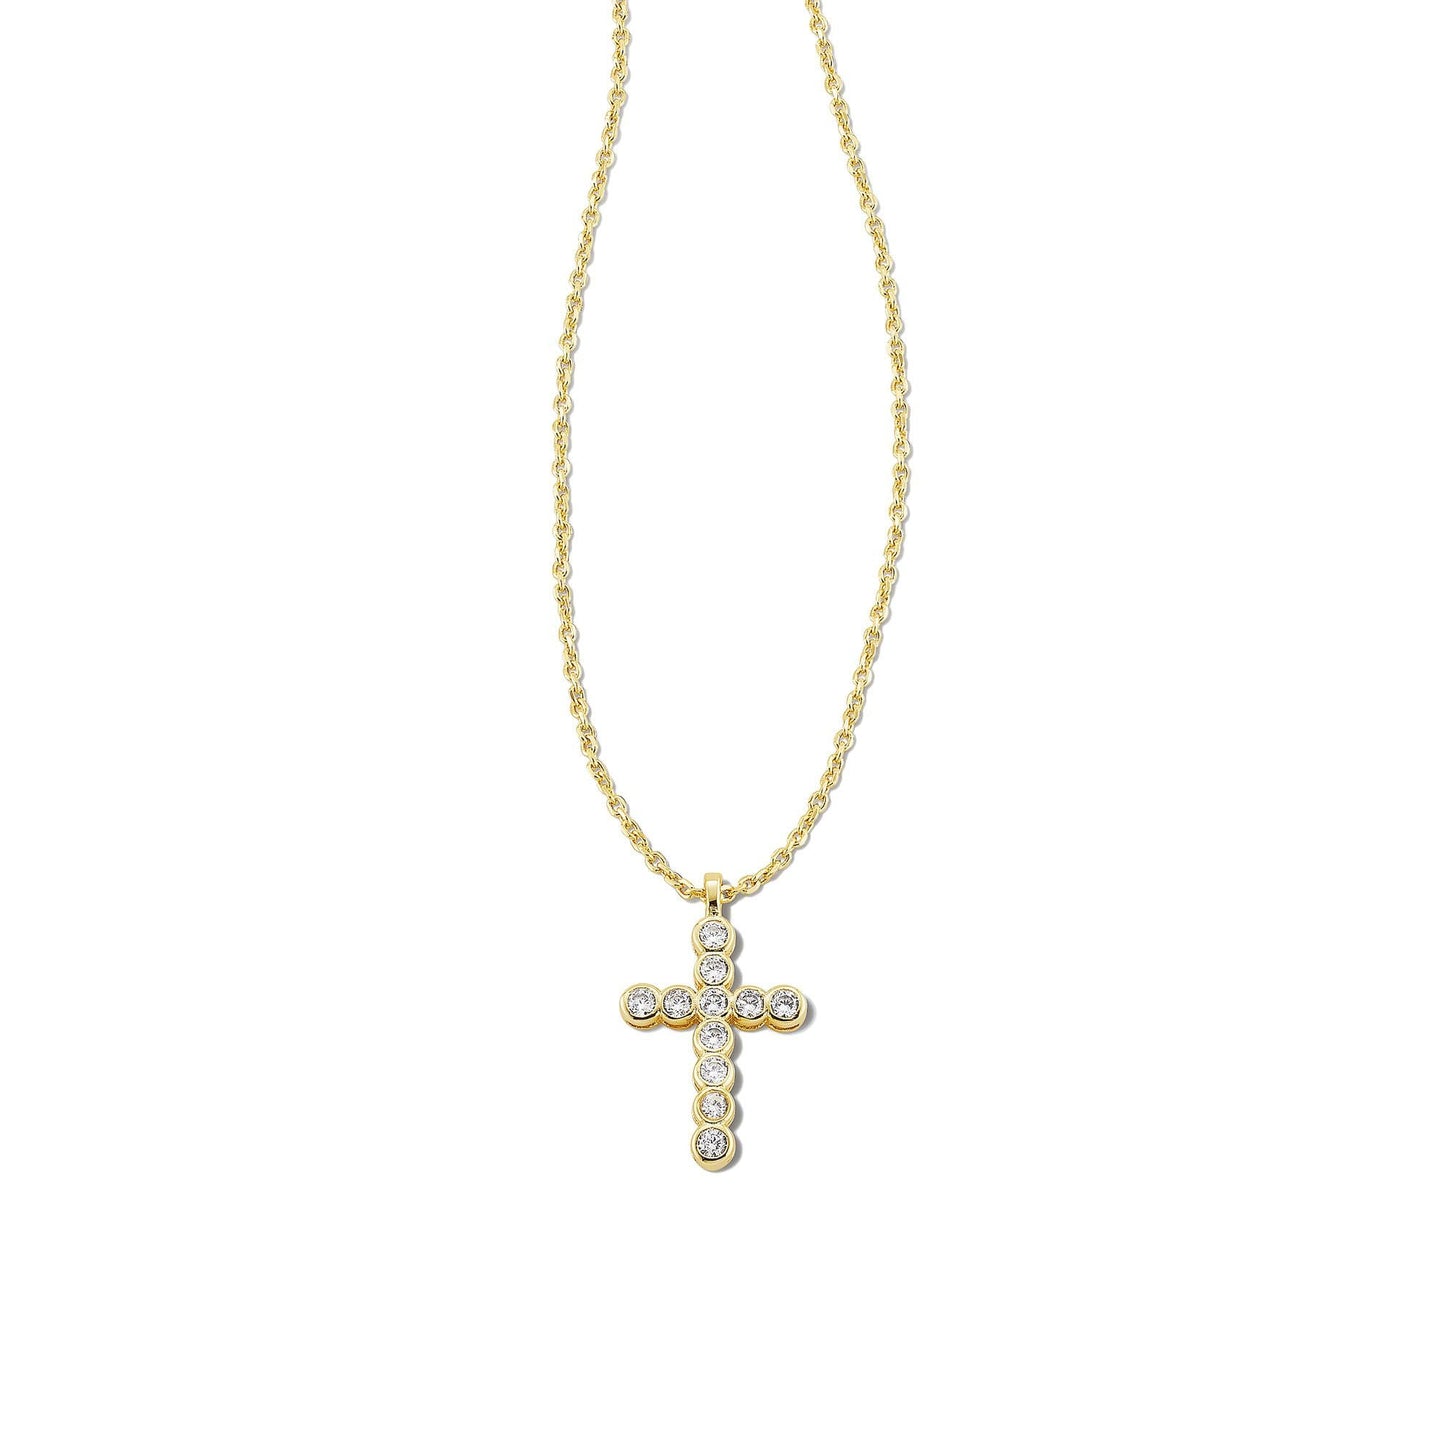 Cross Crystal Pendant Necklace in Gold